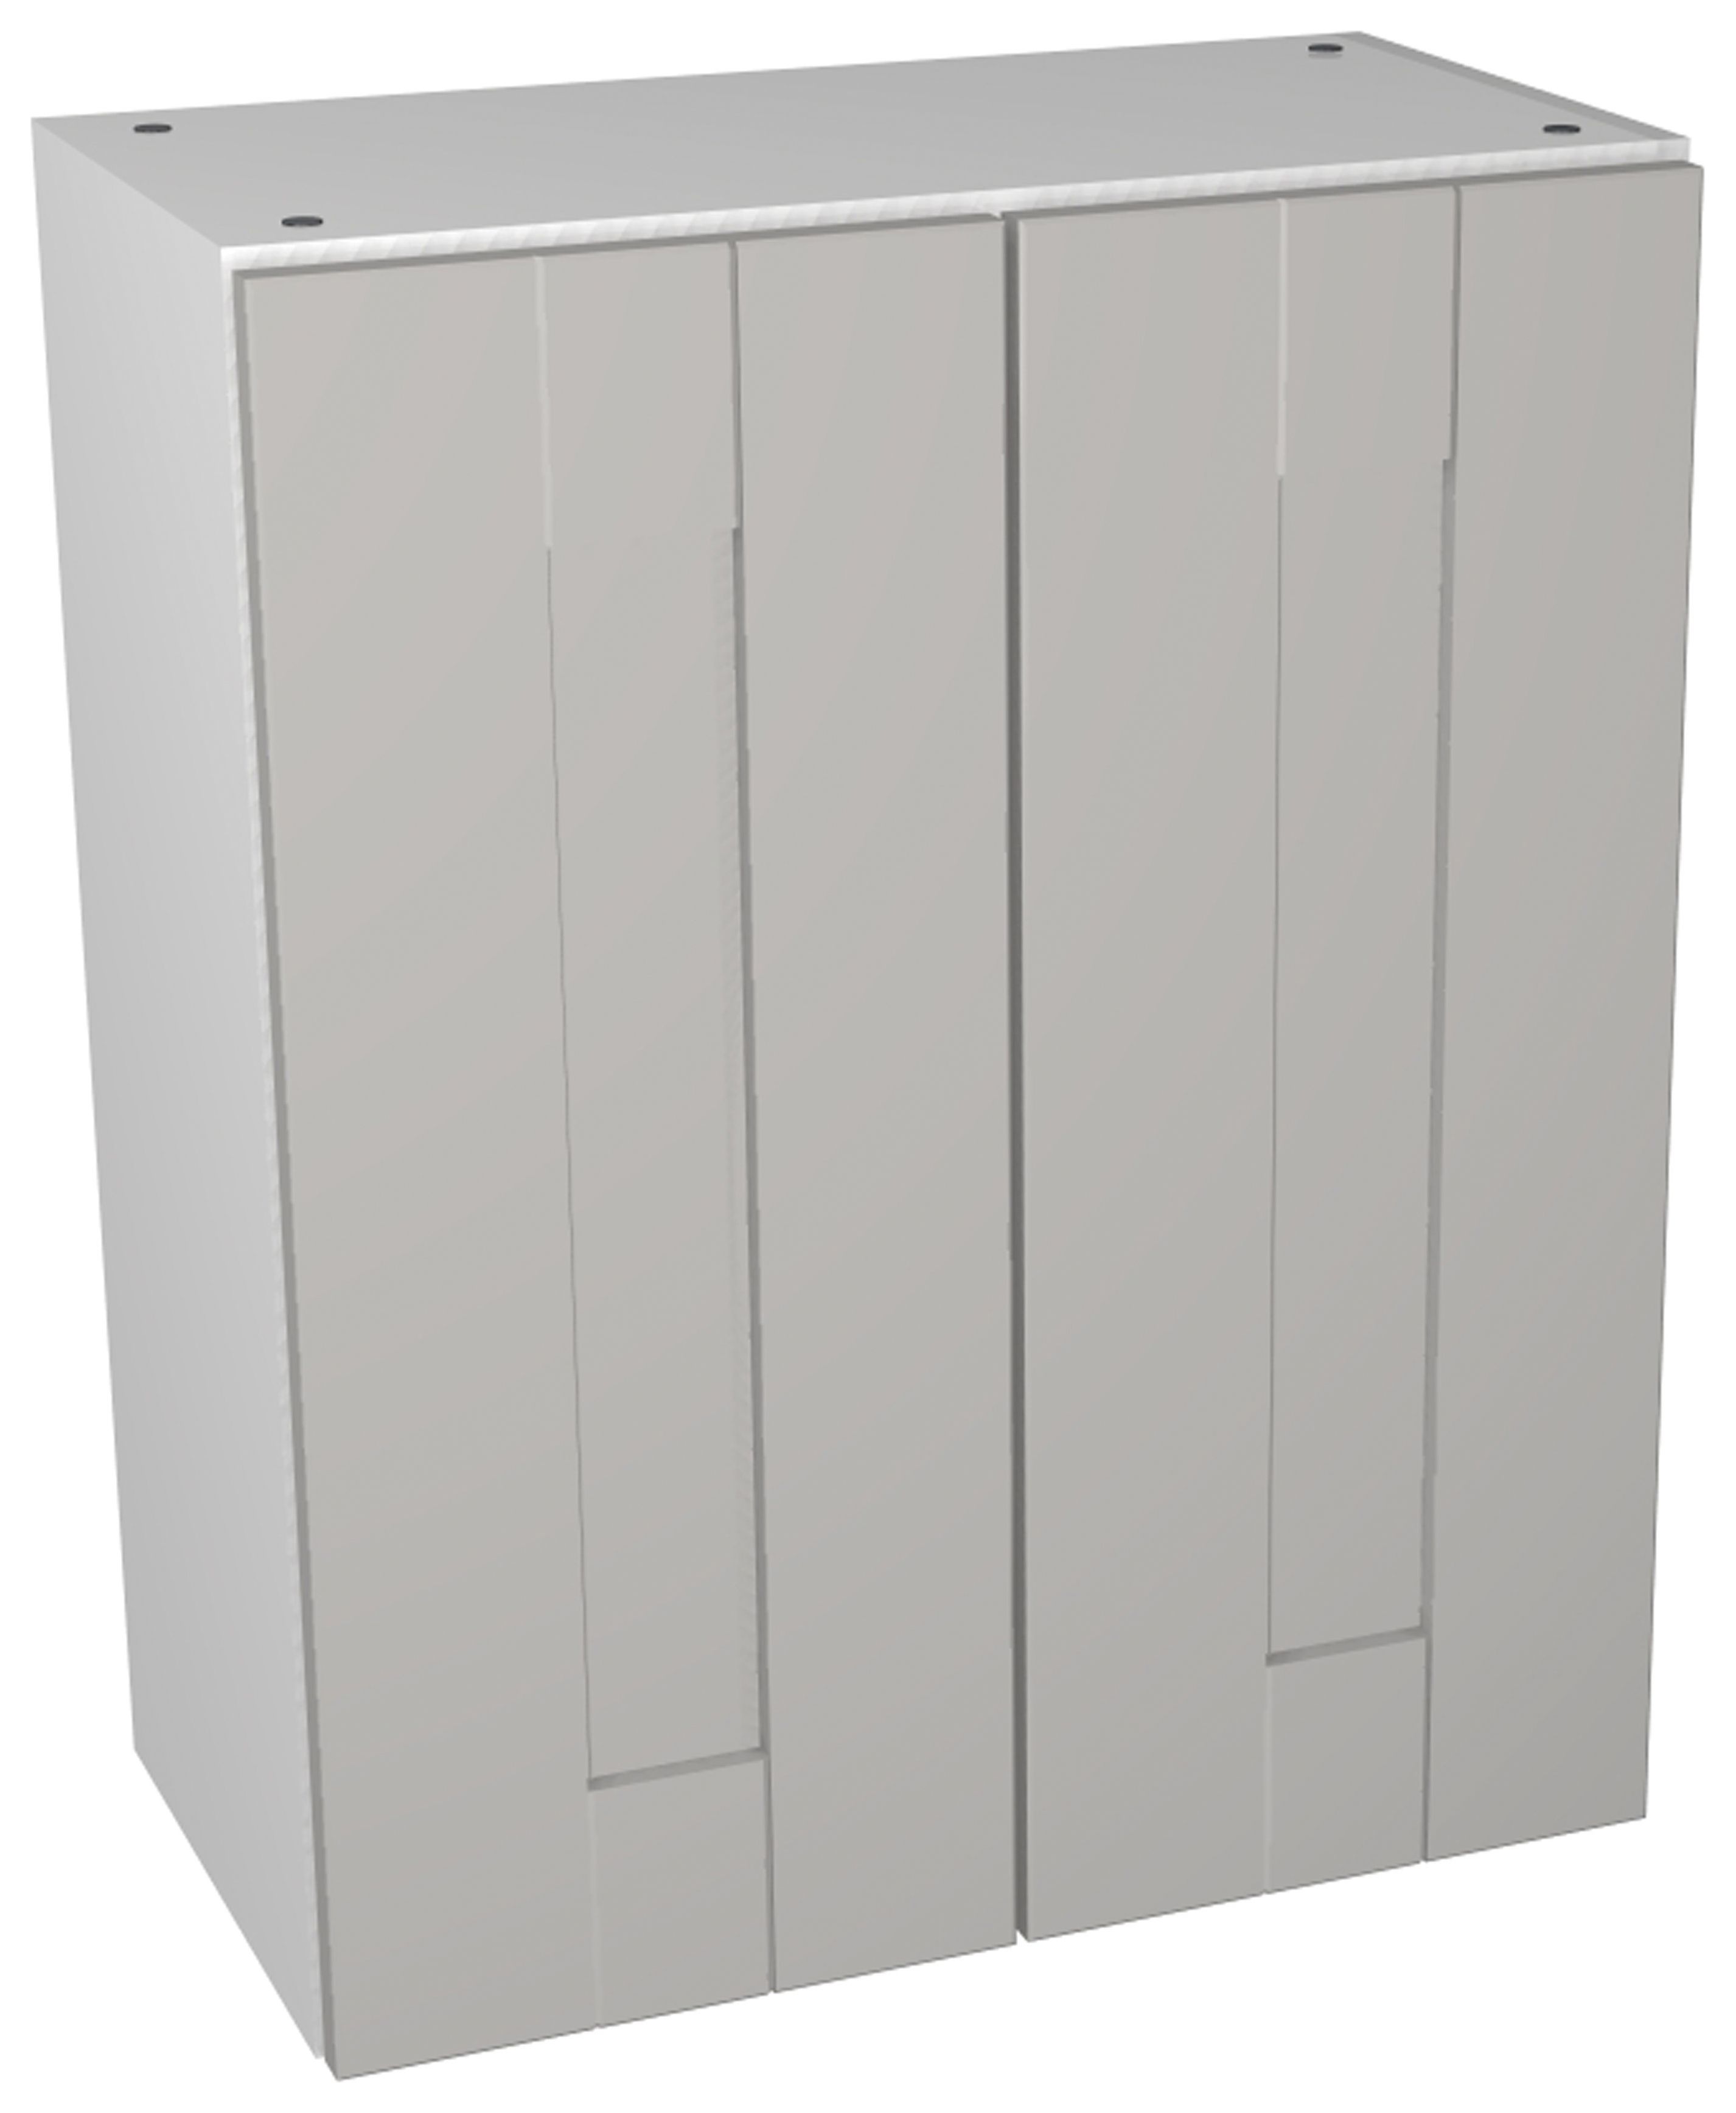 Image of Wickes Vermont Grey Base / Wall Storage Unit - 600 x 735mm